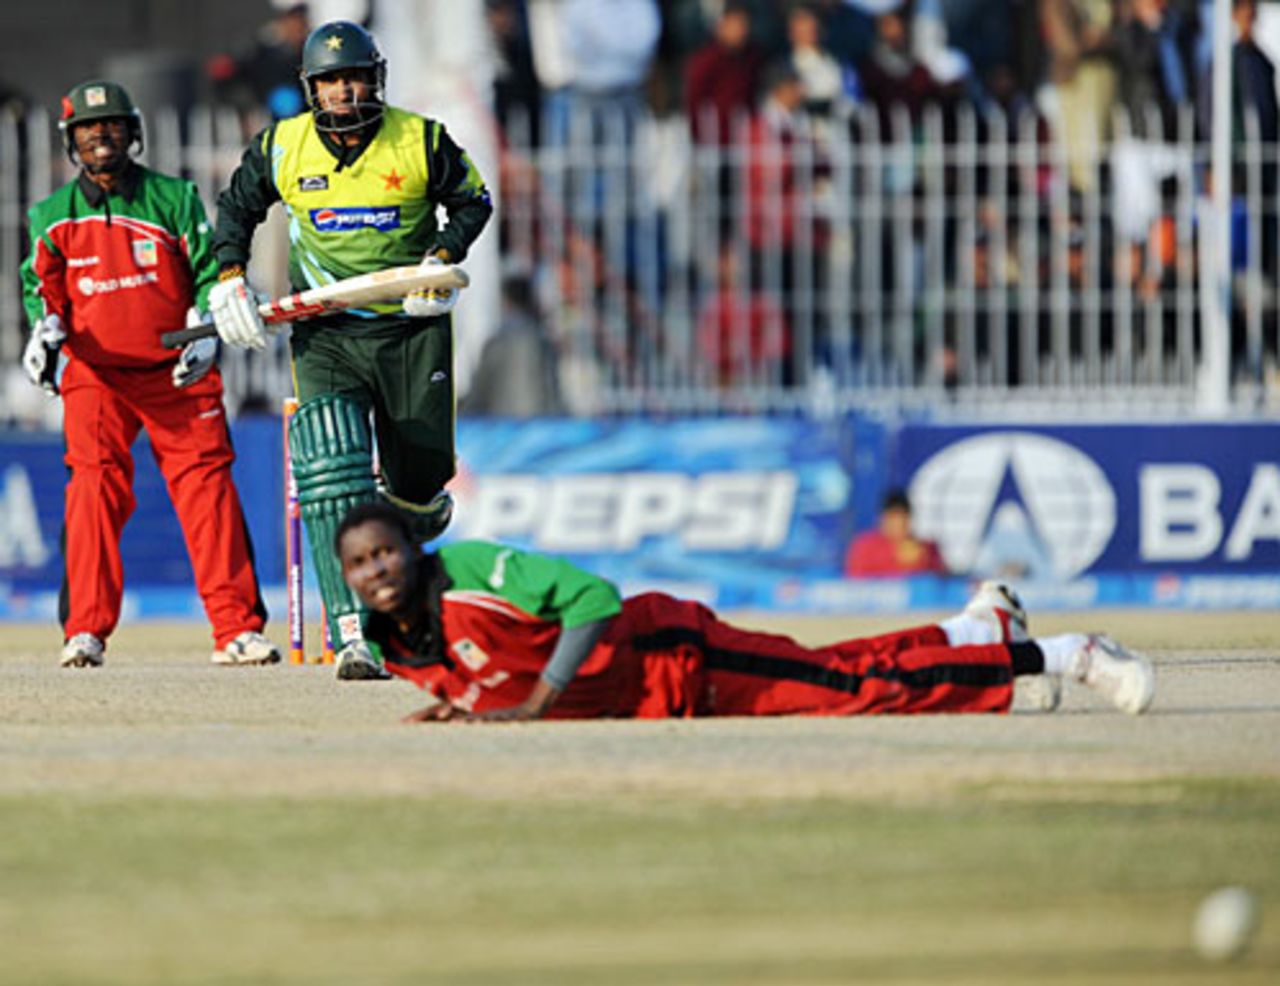 Mohammad Yousuf drives the ball past the bowler, Pakistan v Zimbabwe, 4th ODI, Mobilink Cup, Faisalabad, January 30, 2008